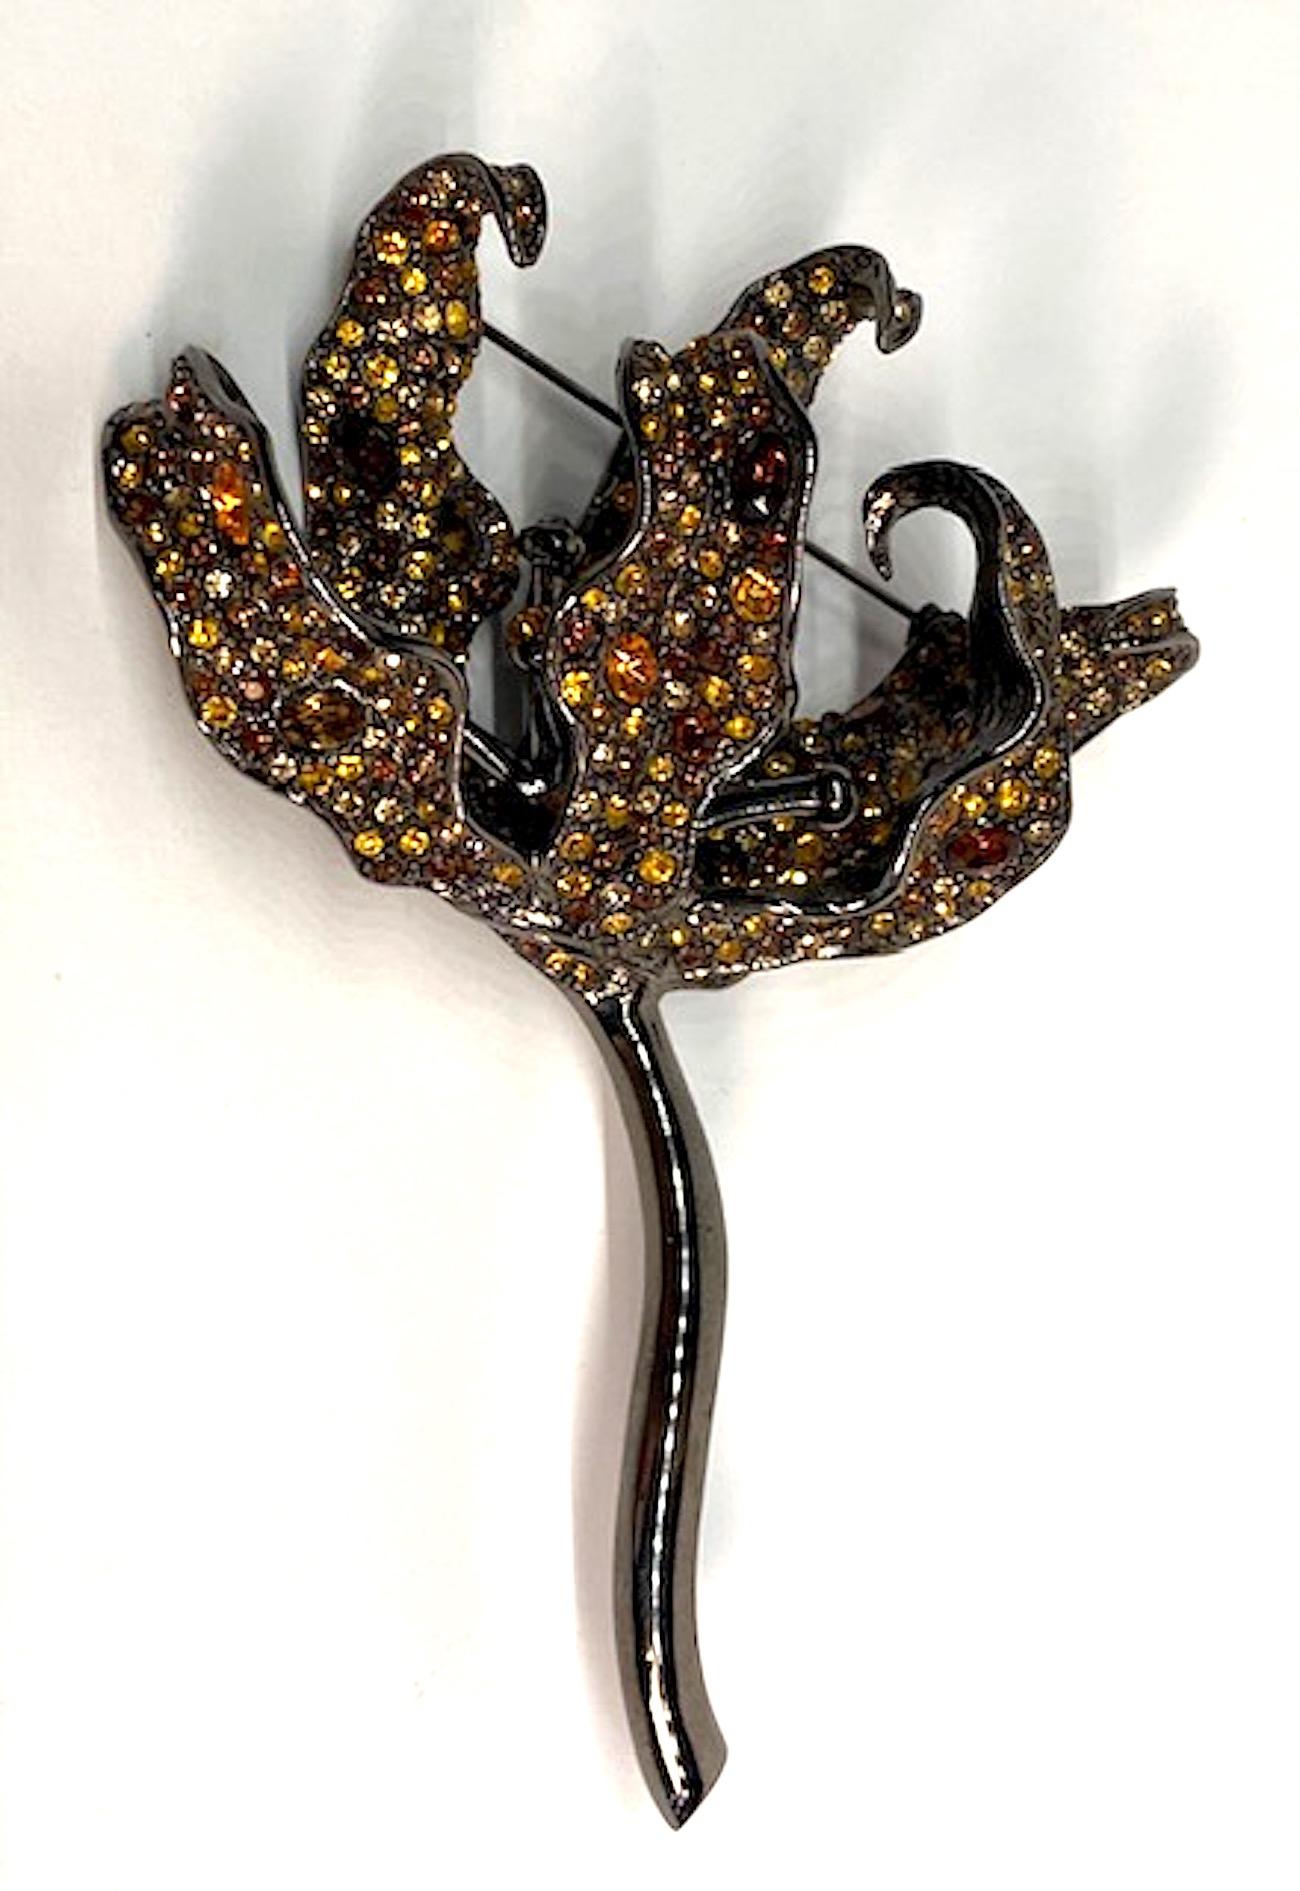 Beautifully made and sculptural is this Kenneth Lane three dimension tiger lily brooch. The finish is a charcoal gun metal color. The petals are set with round and oval gold, champagne and amber brown rhinestones. The brooch is 4 inches wide, 5.25